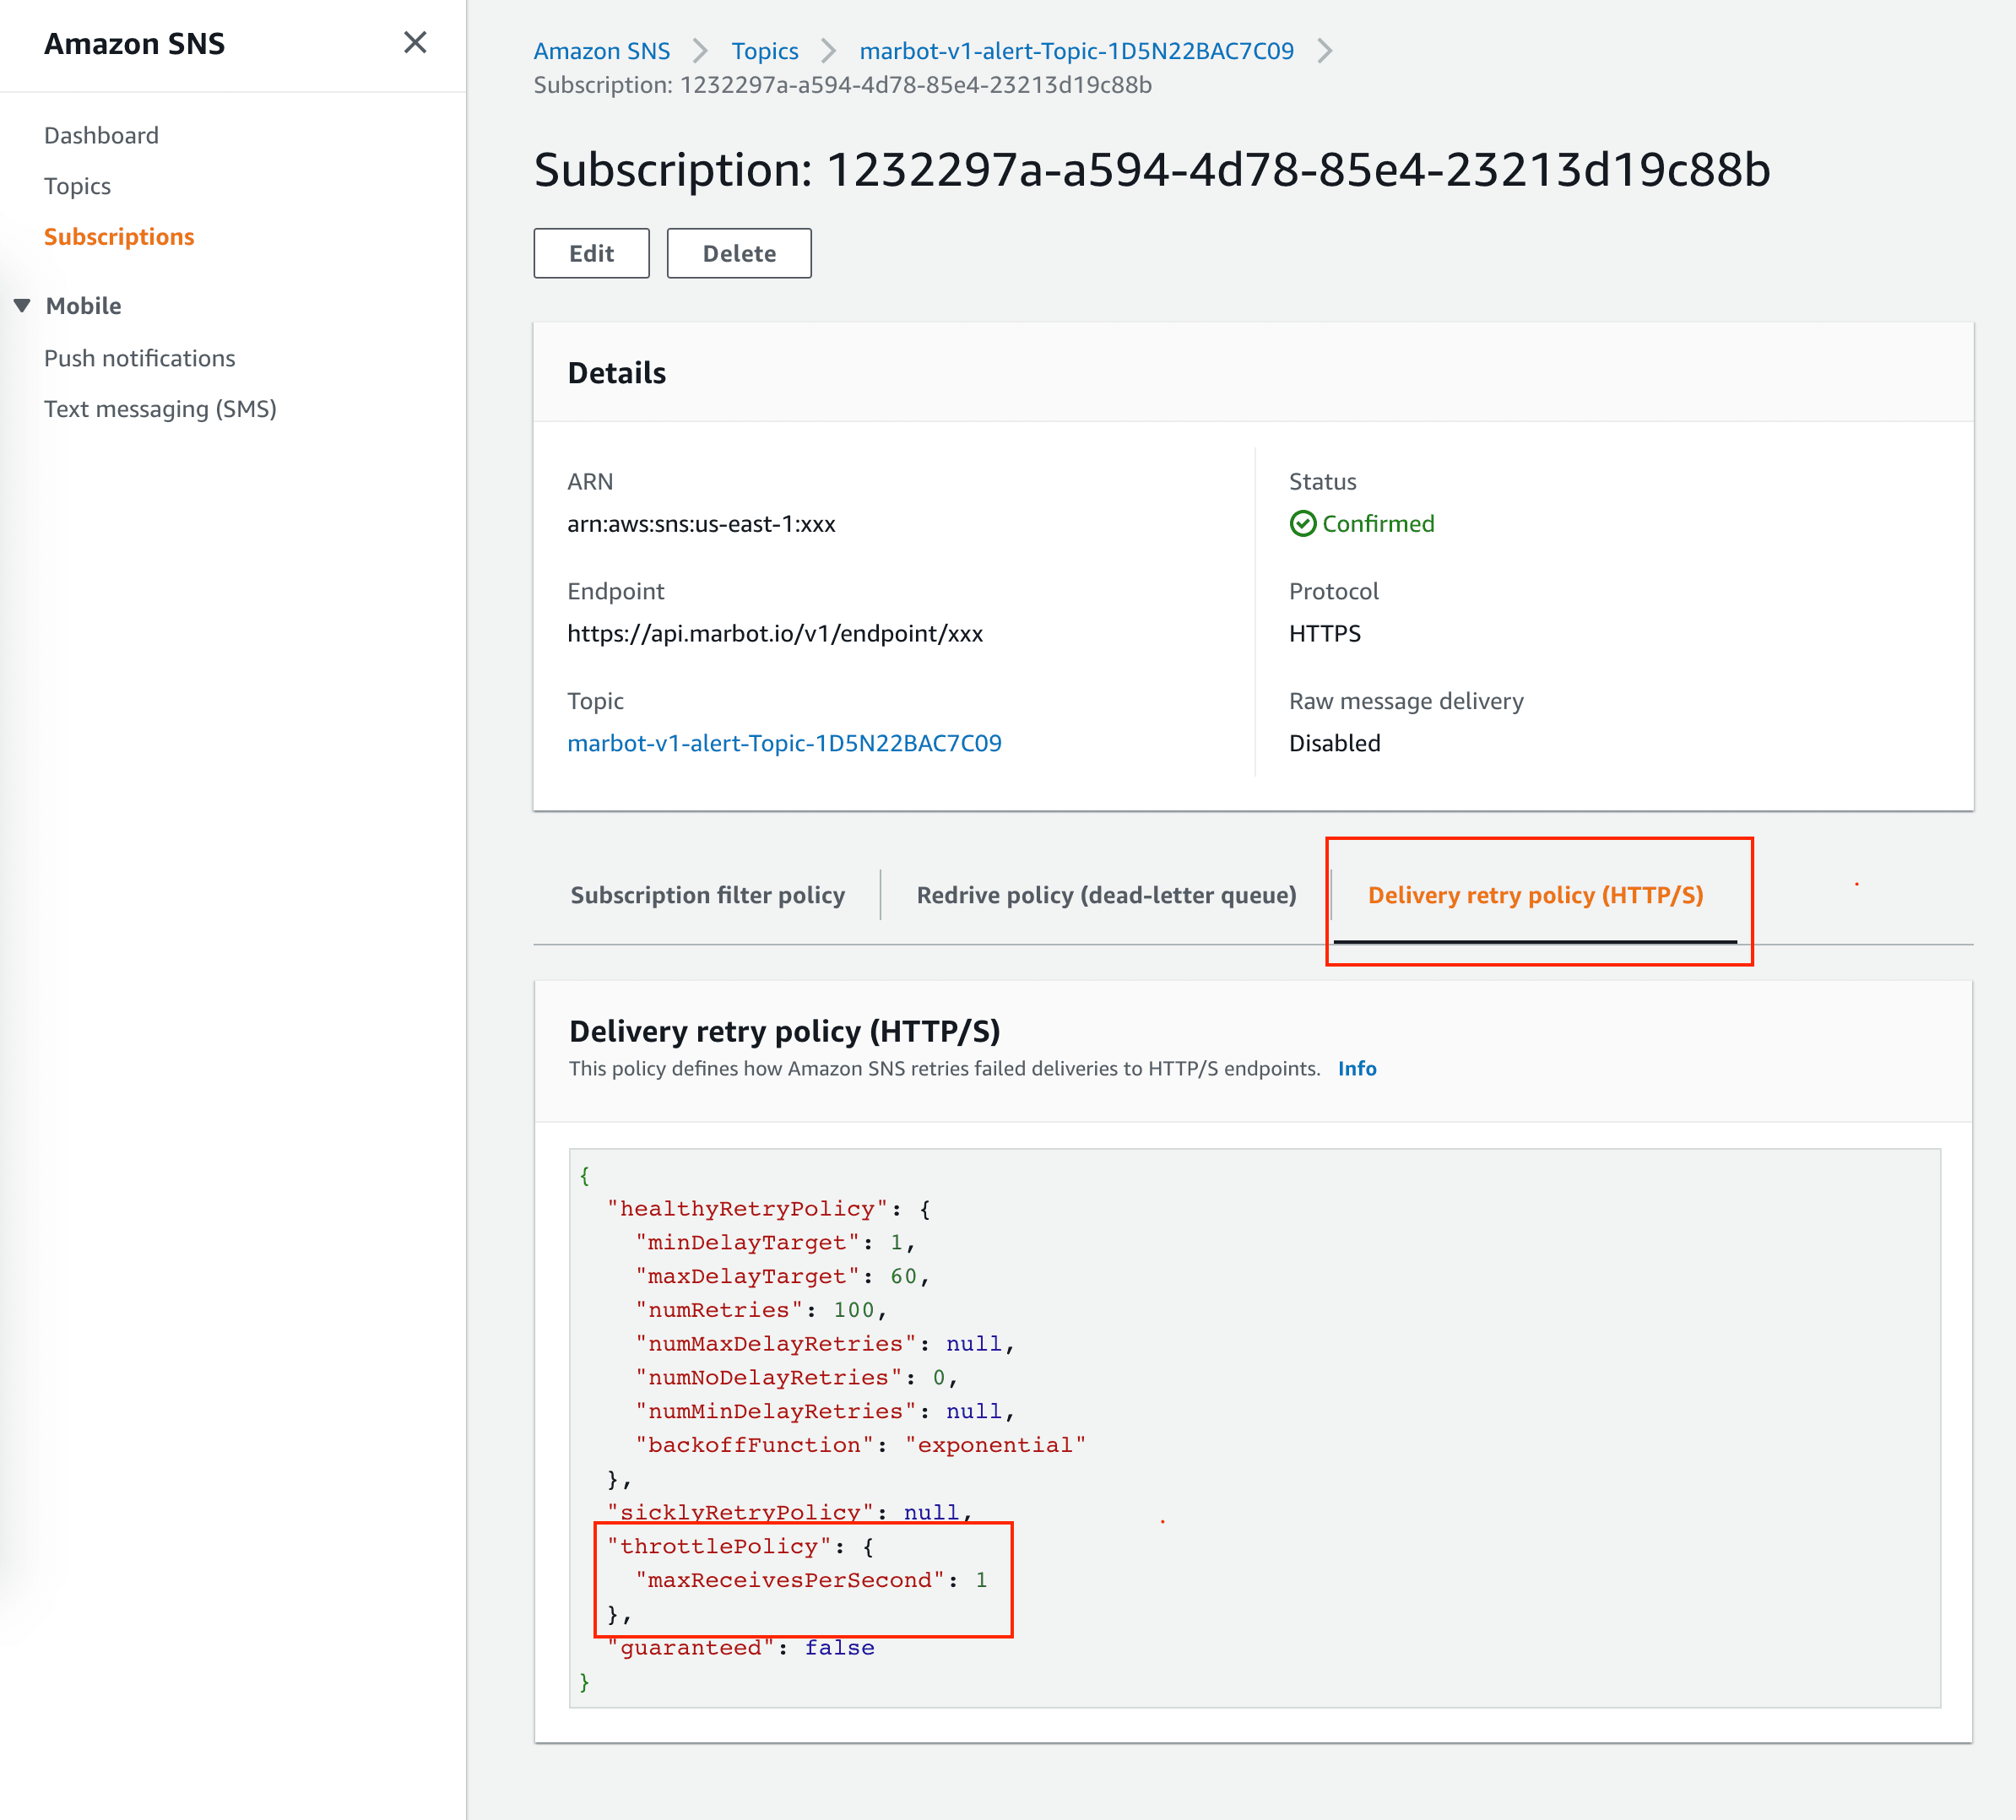 Workaround: modify the delivery retry policy